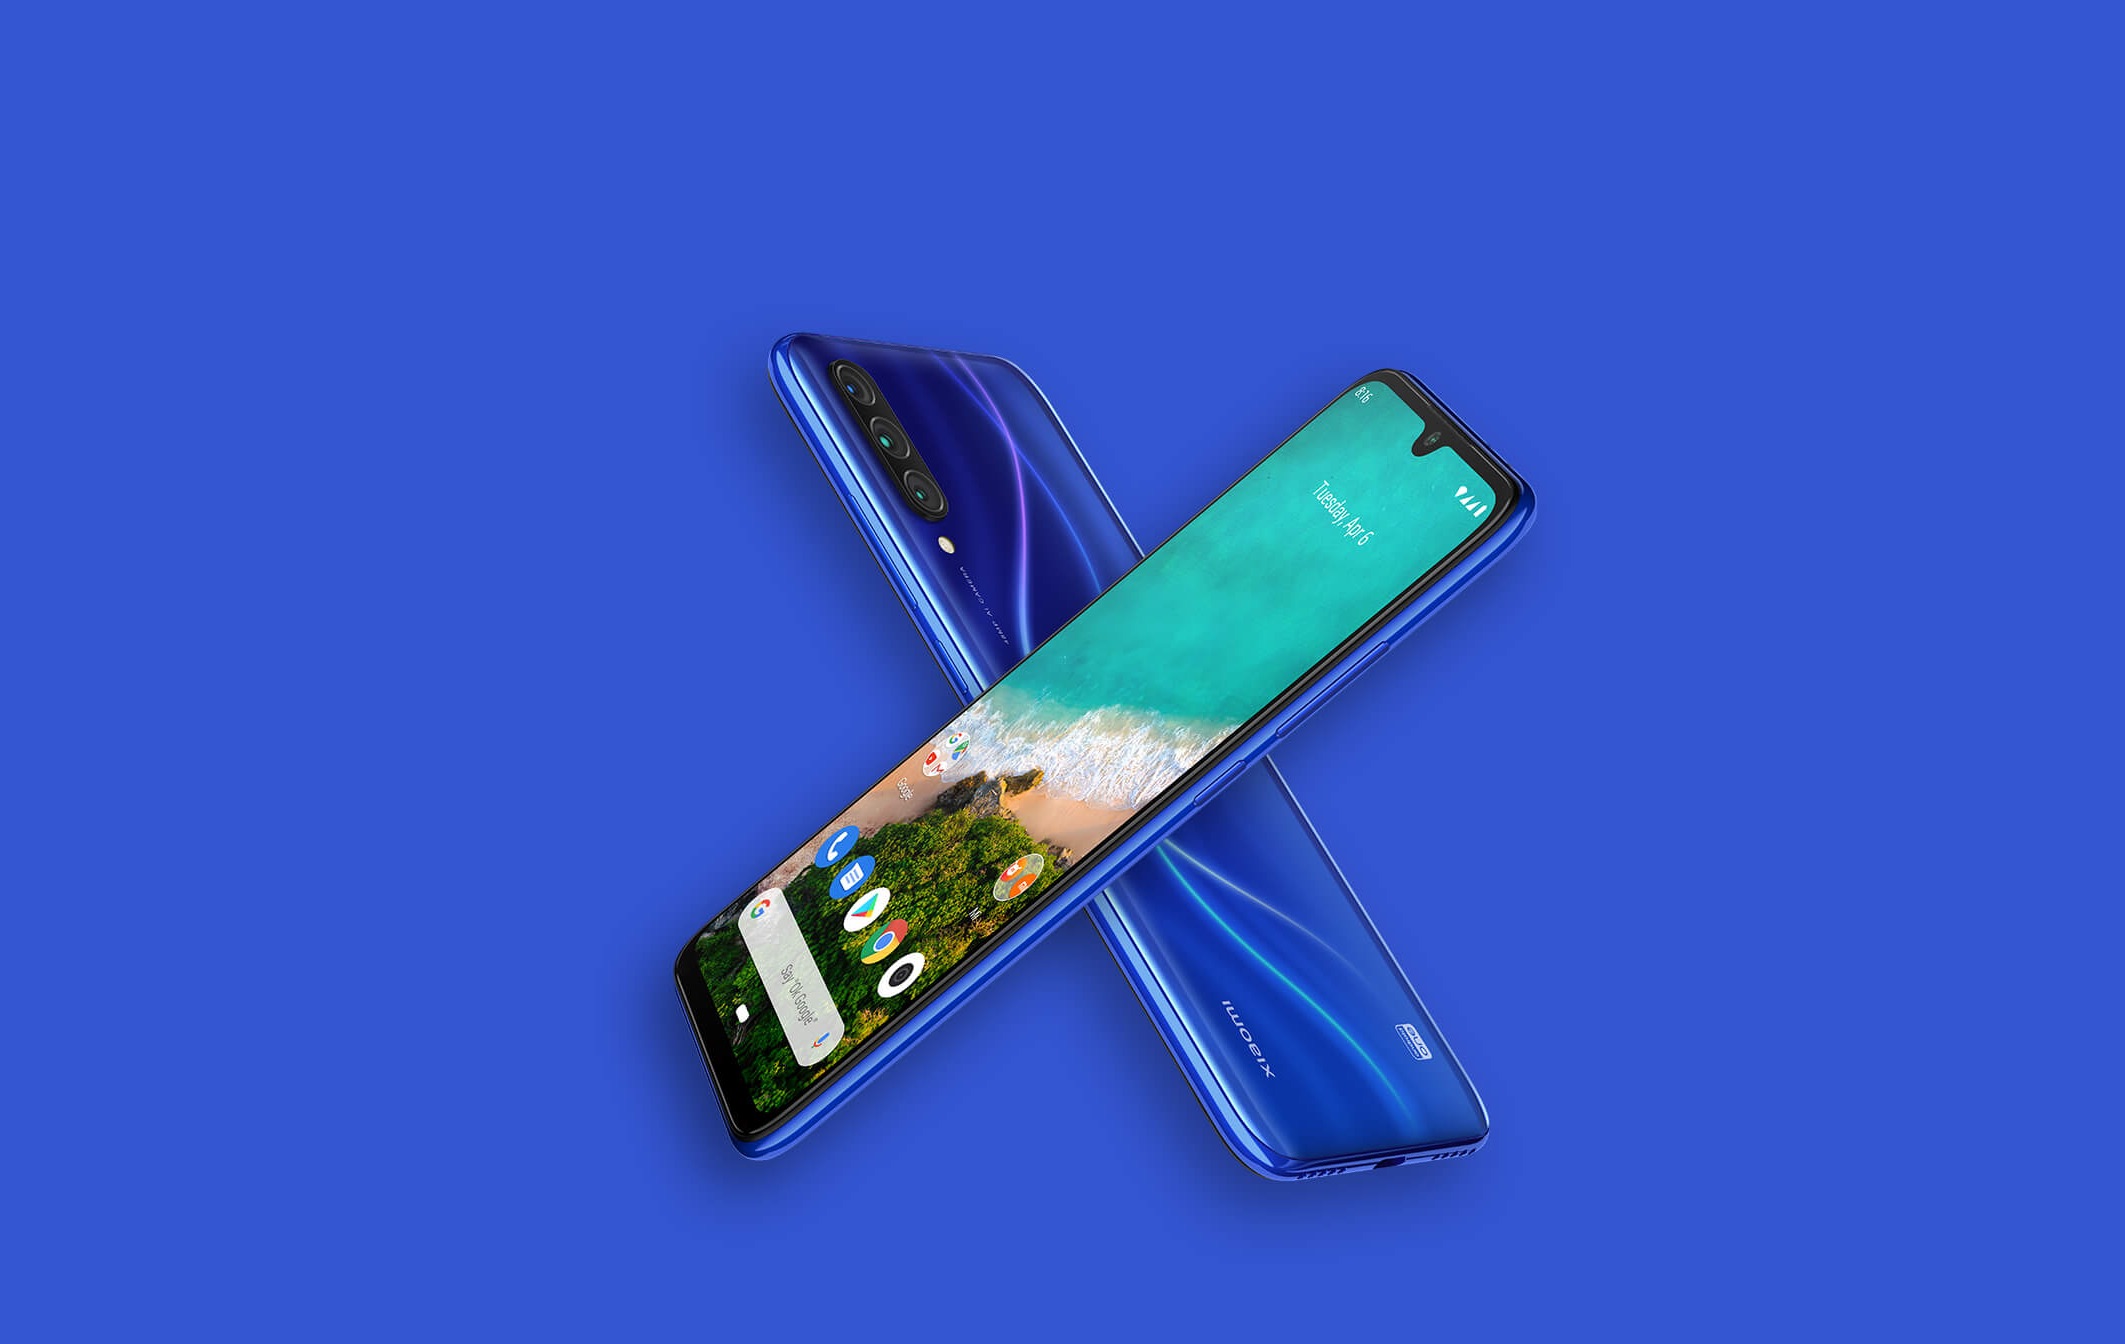 Xiaomi Mi A3 Android One smartphone